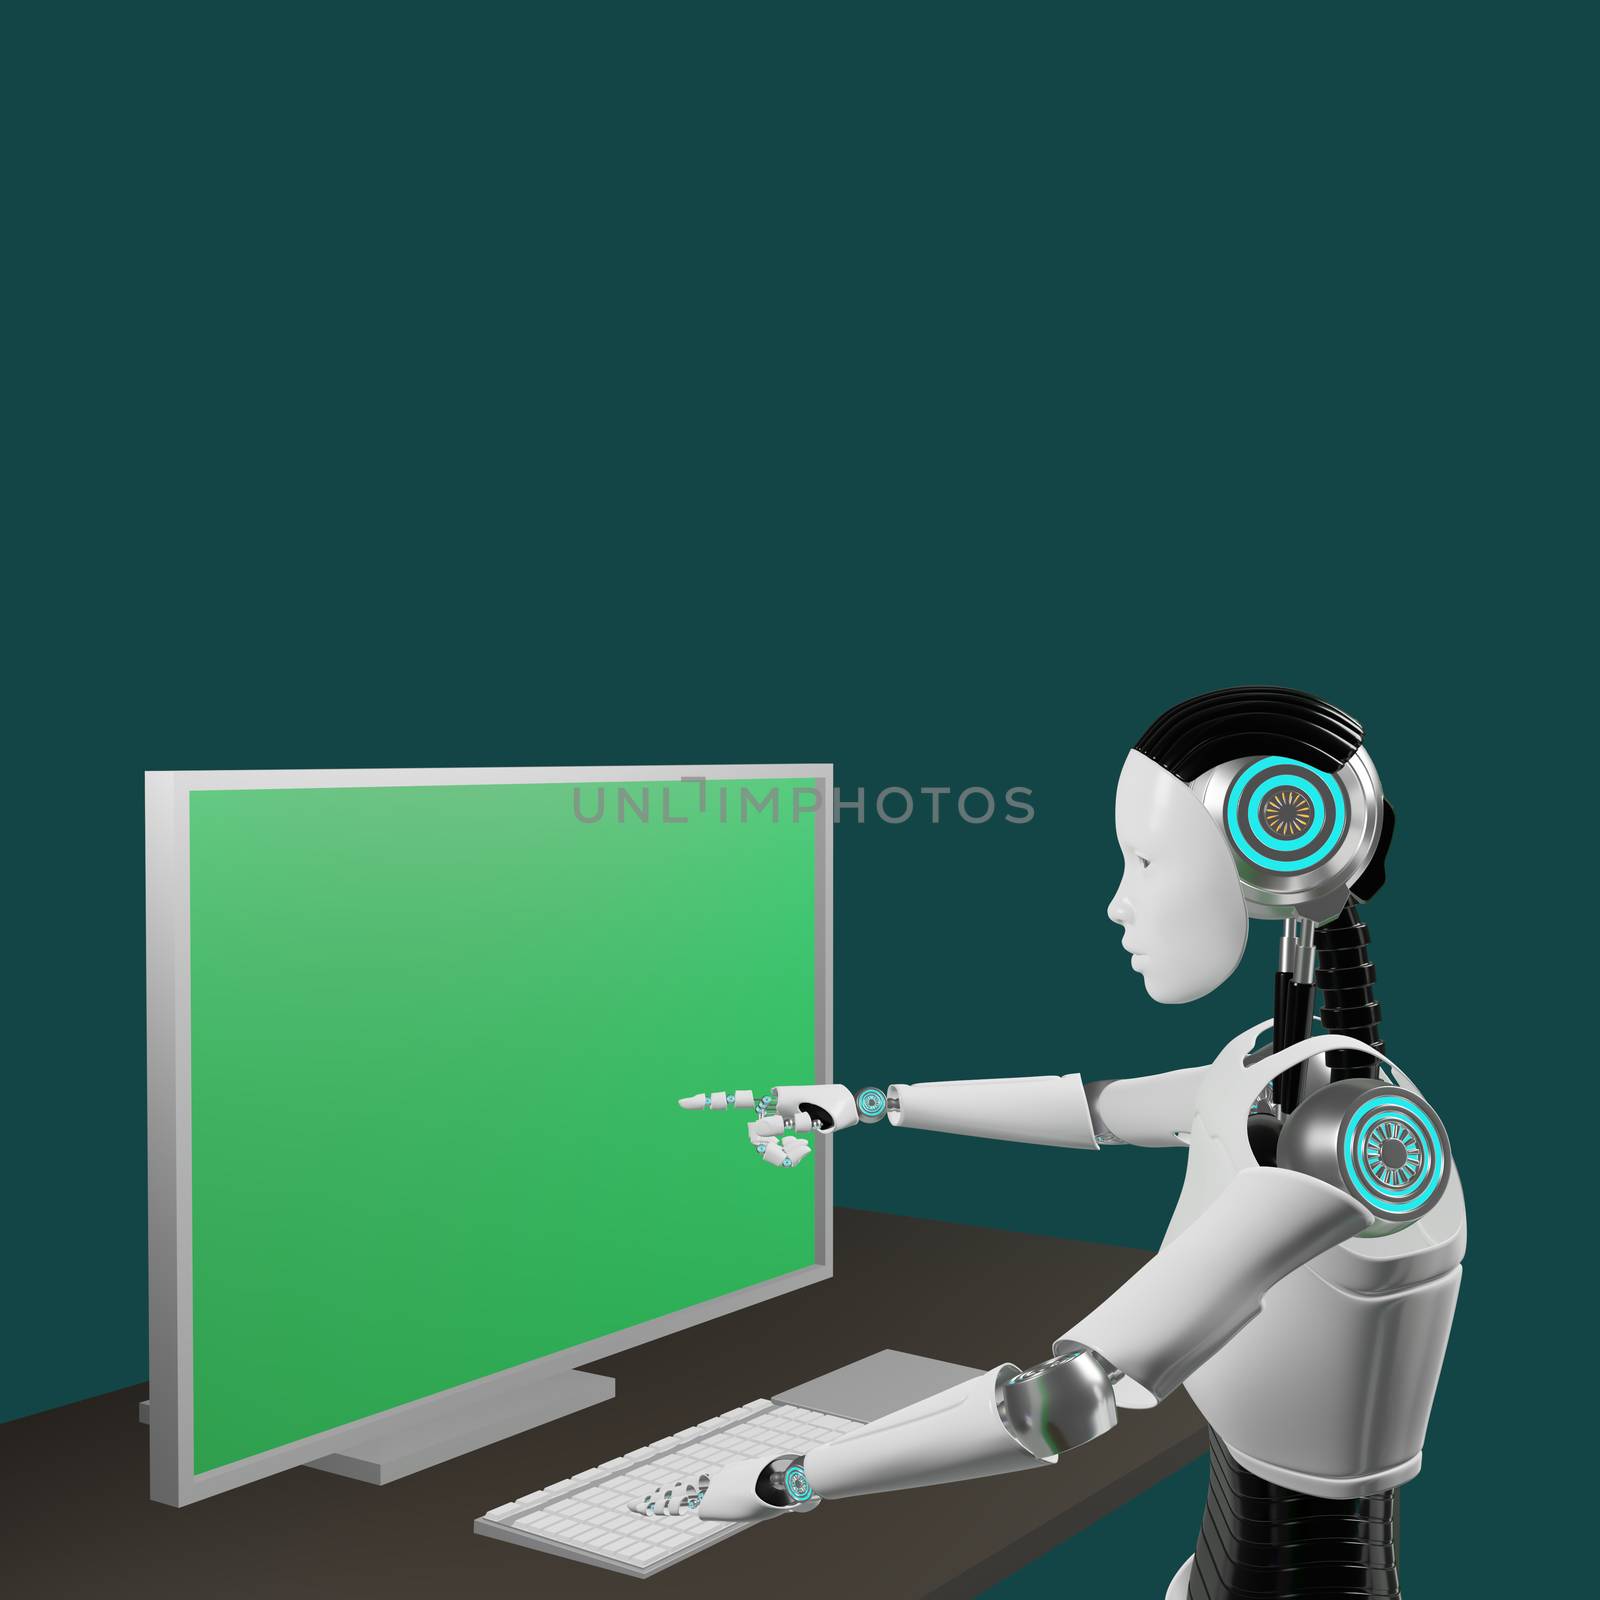 Android is pointing at monitor of computer with green screen on table and color background with copy space 3d rendering. Business and technology concept photography.